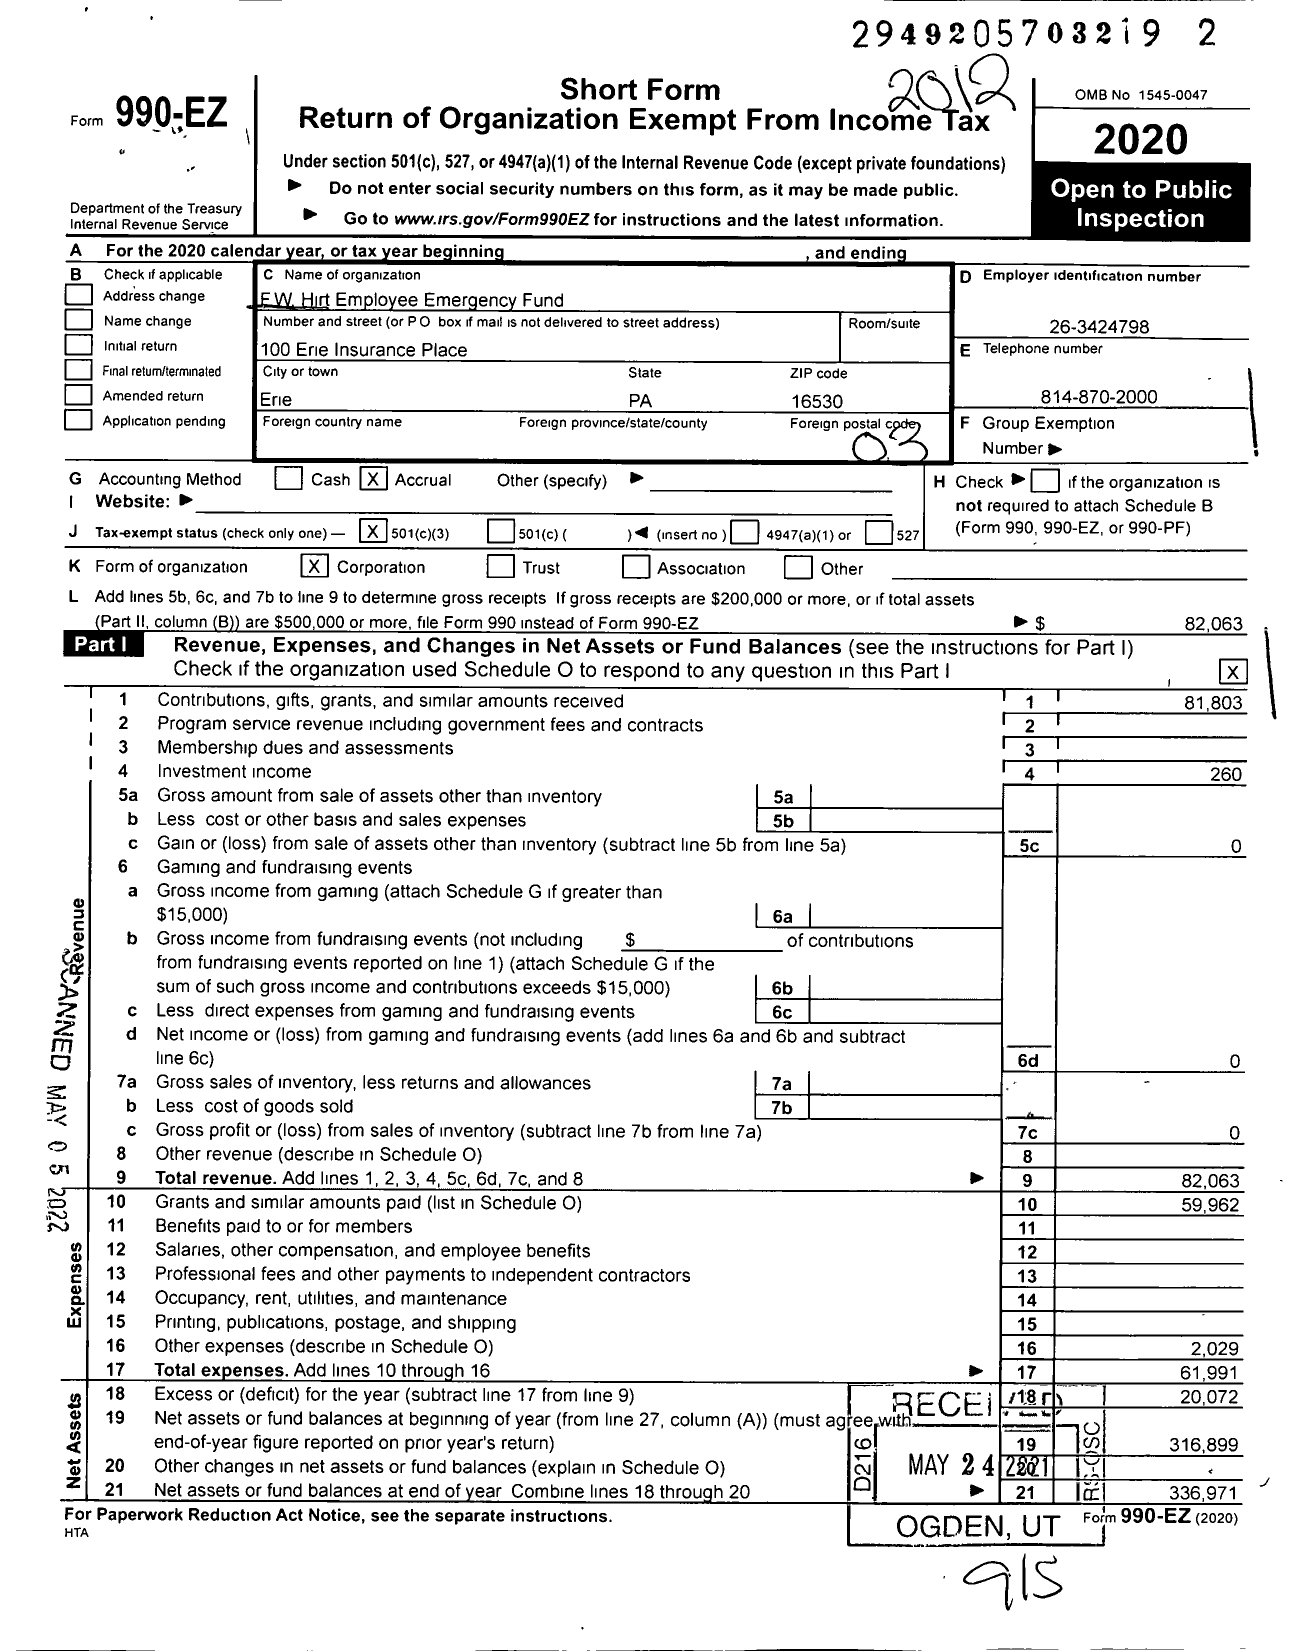 Image of first page of 2020 Form 990EZ for F W Hirt Employee Emergency Fund